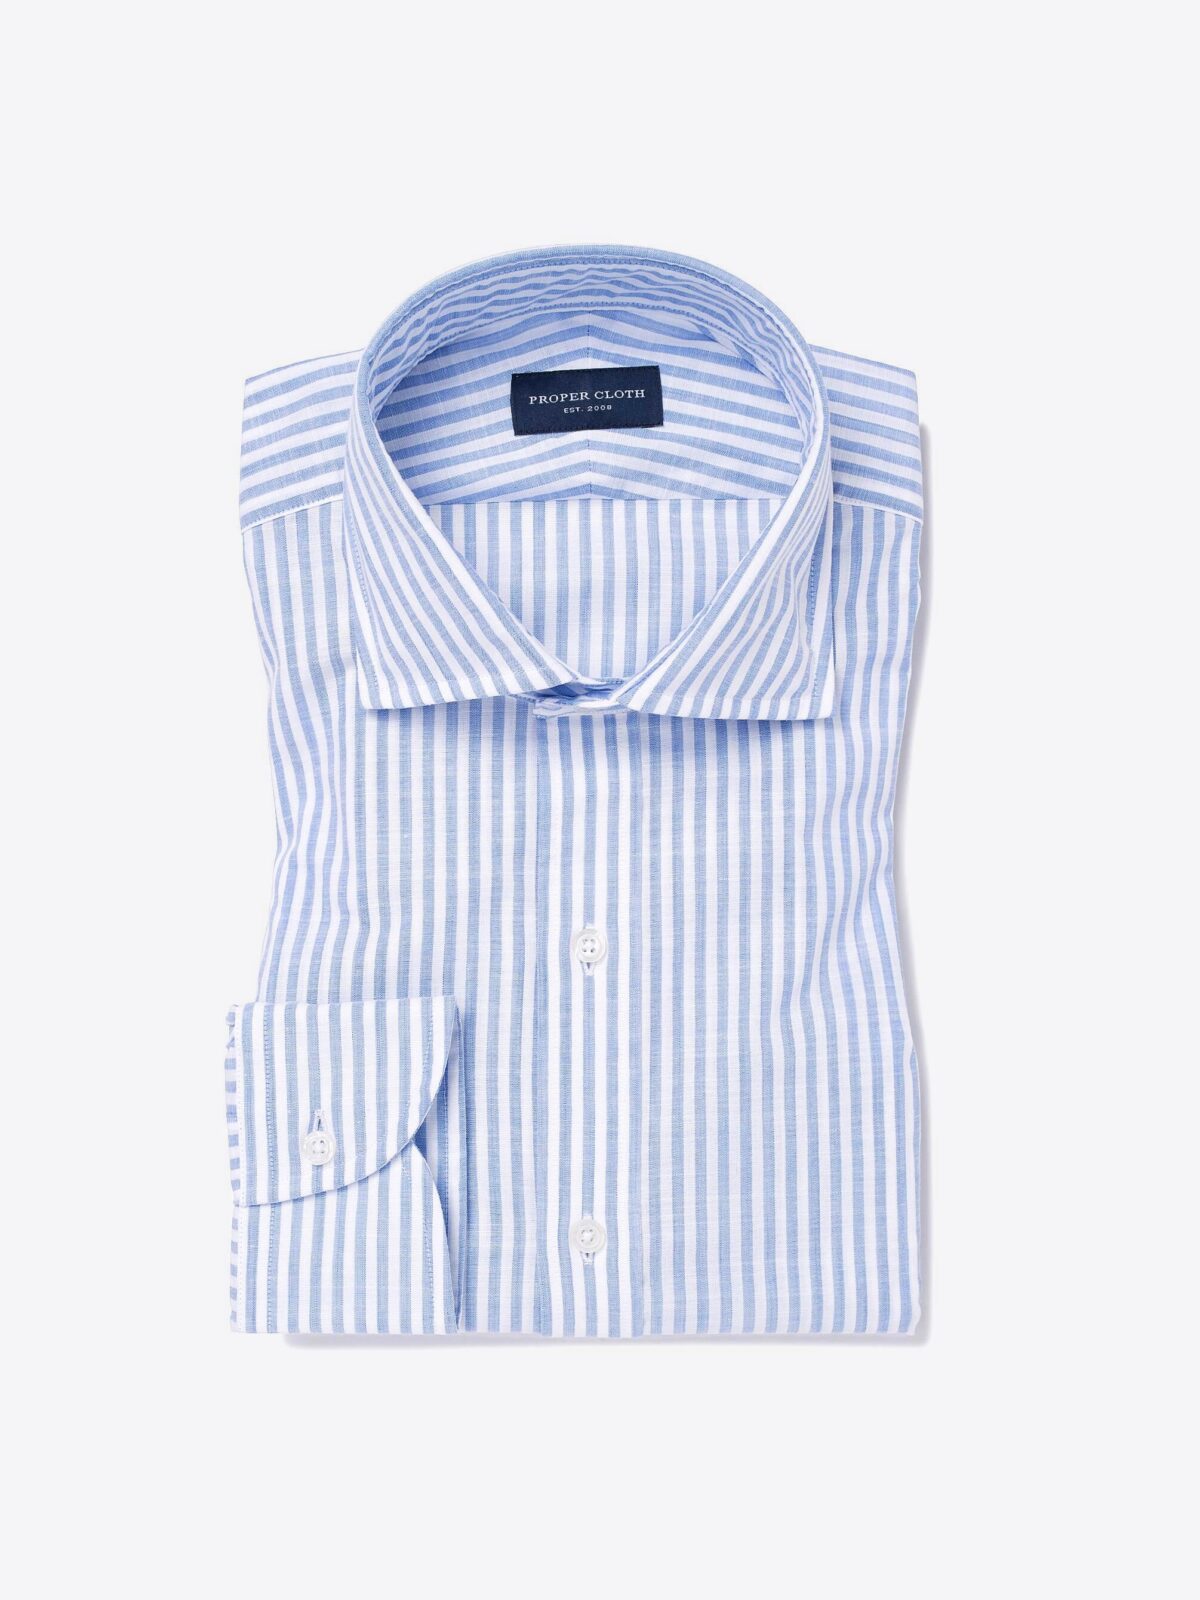 Albini Blue Stripe Comfort Chambray Fitted Shirt Shirt by Proper Cloth